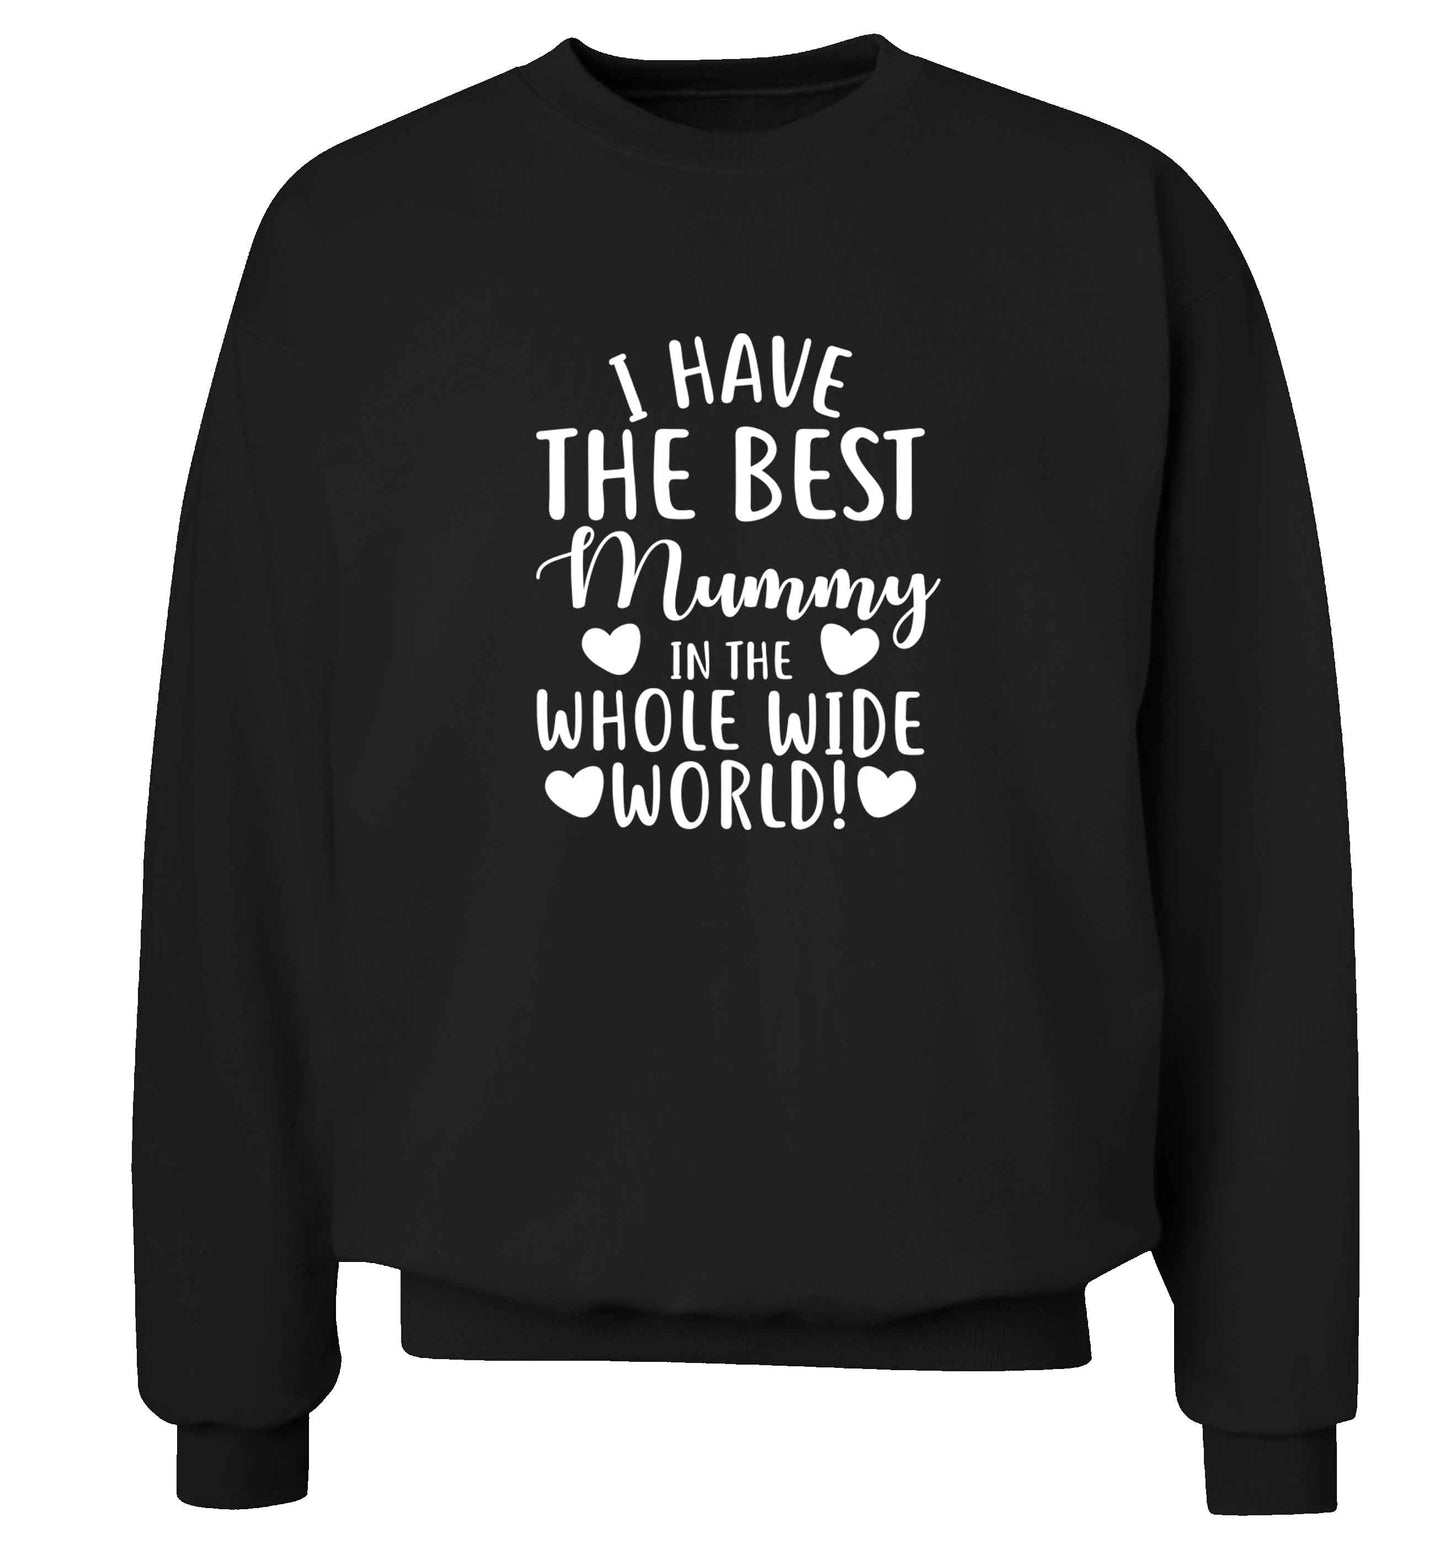 I have the best mummy in the whole wide world adult's unisex black sweater 2XL